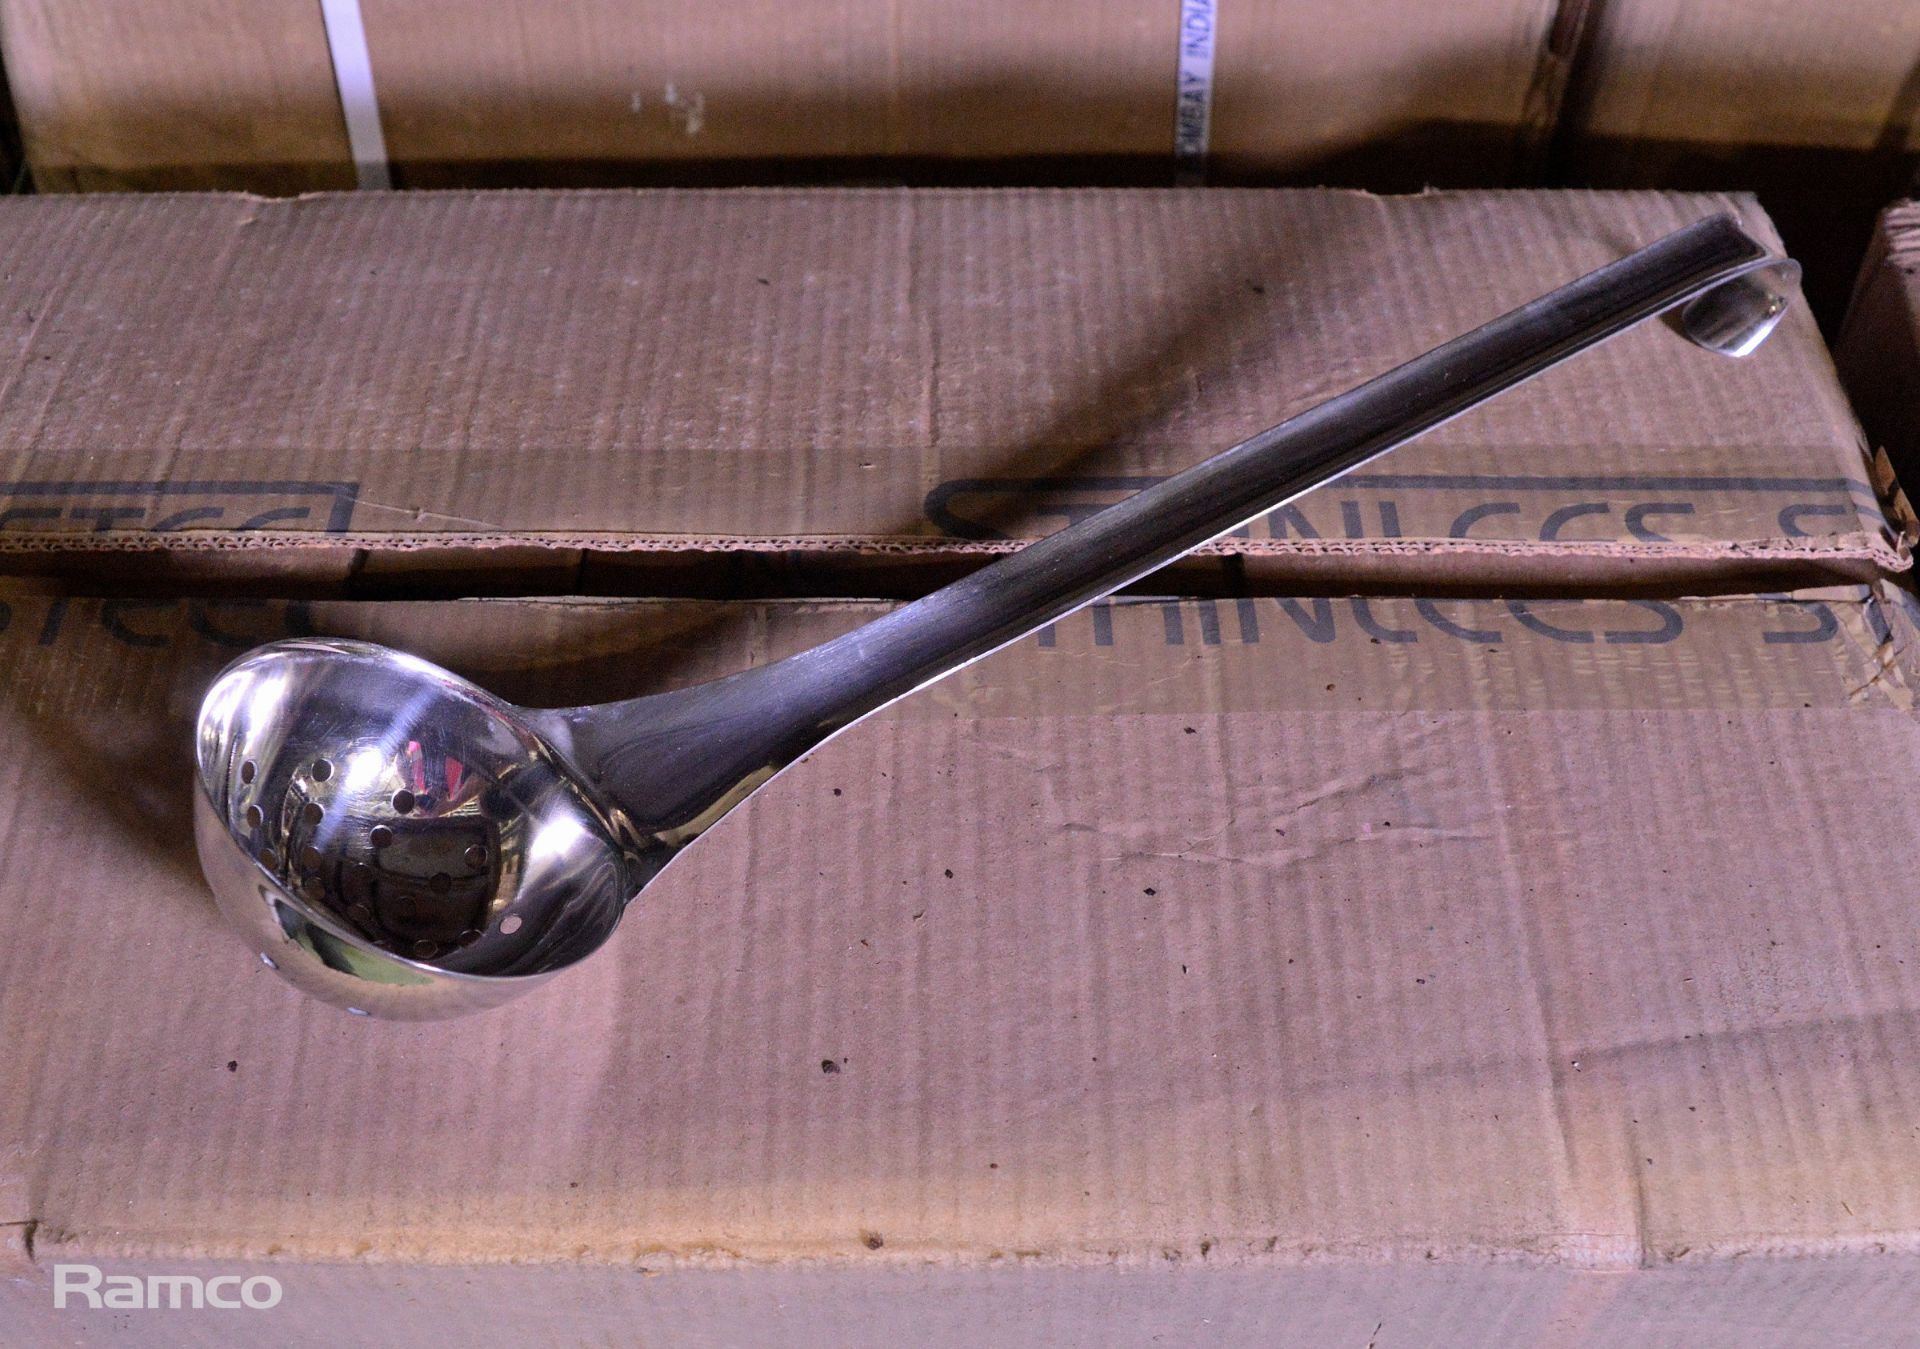 480x Pro Perforated Ladles - Image 2 of 3